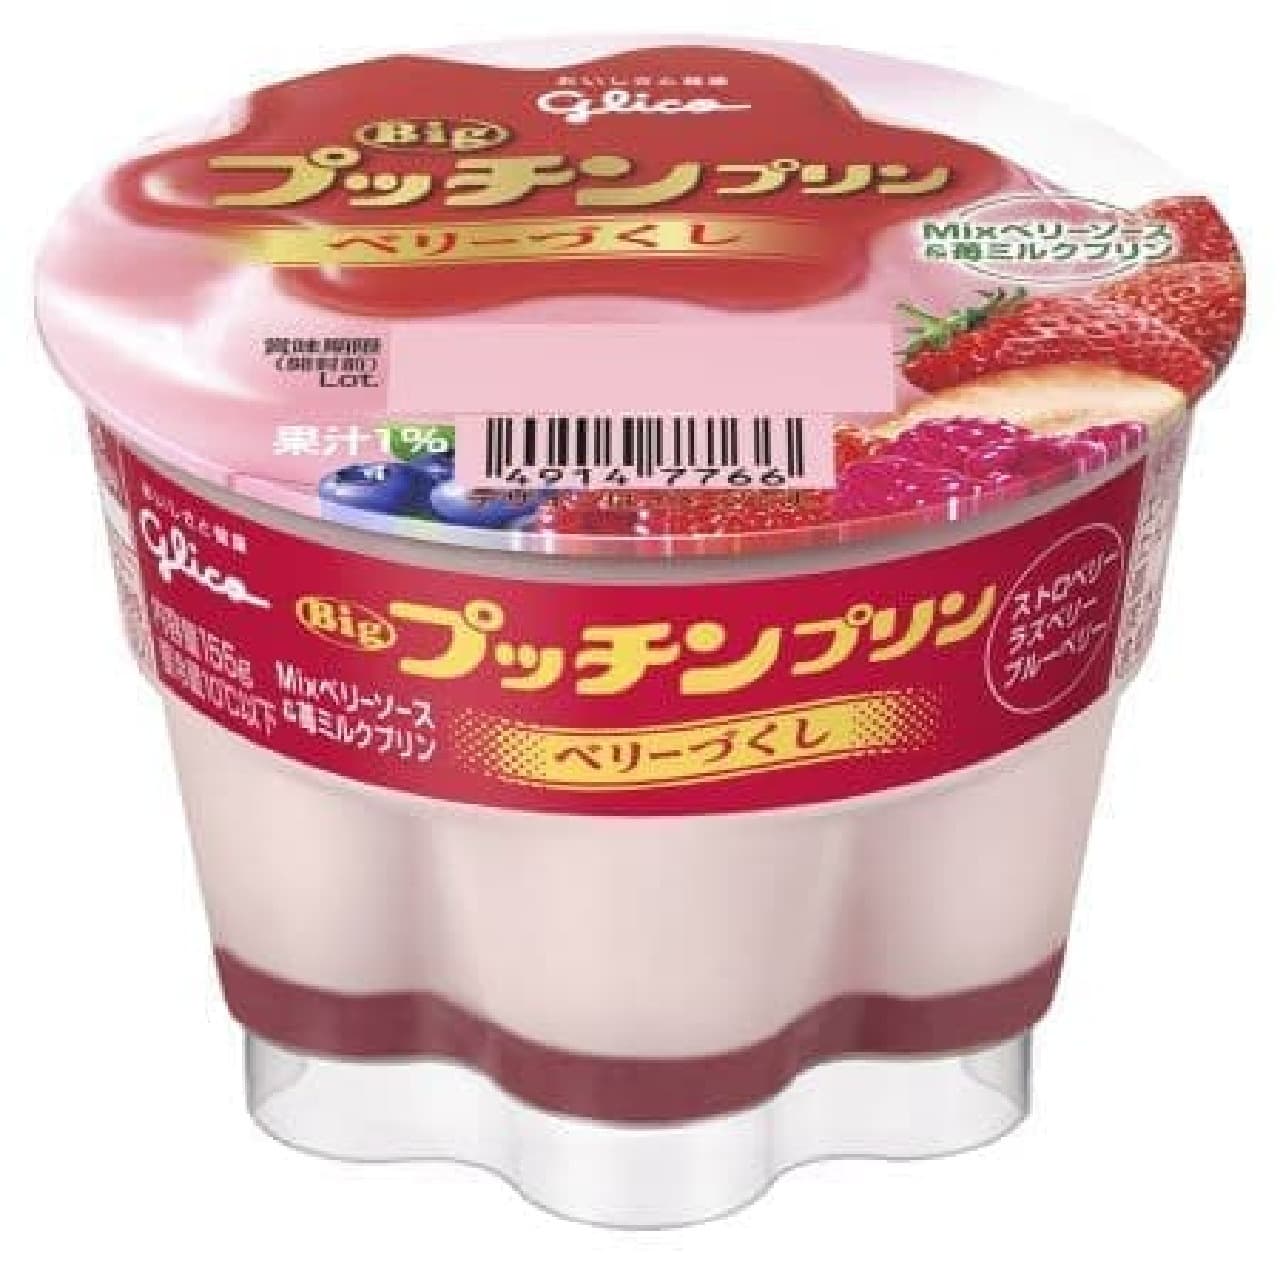 Limited time offer "Putchin Pudding Berry Tsukushi"